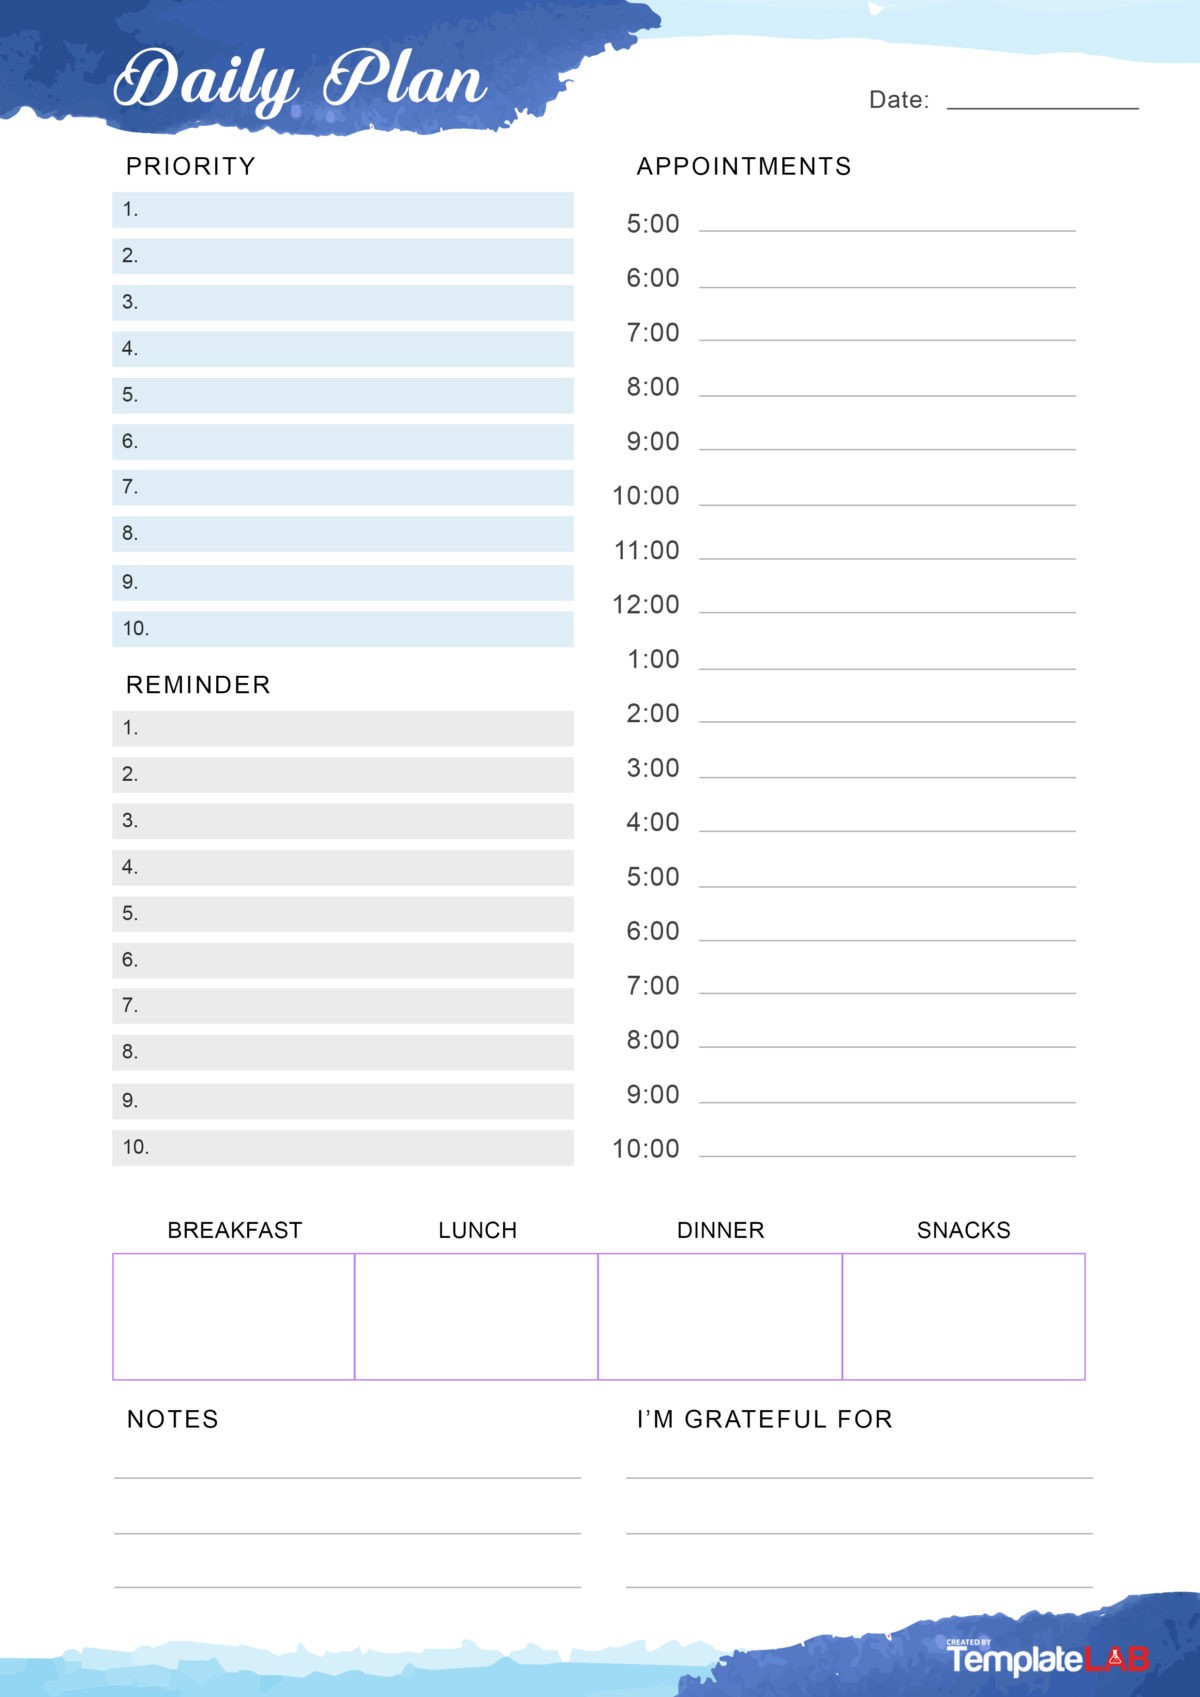 Plan Out Your Daily and Become More Productive Productivity Planner Sheets Simple Daily Routine 